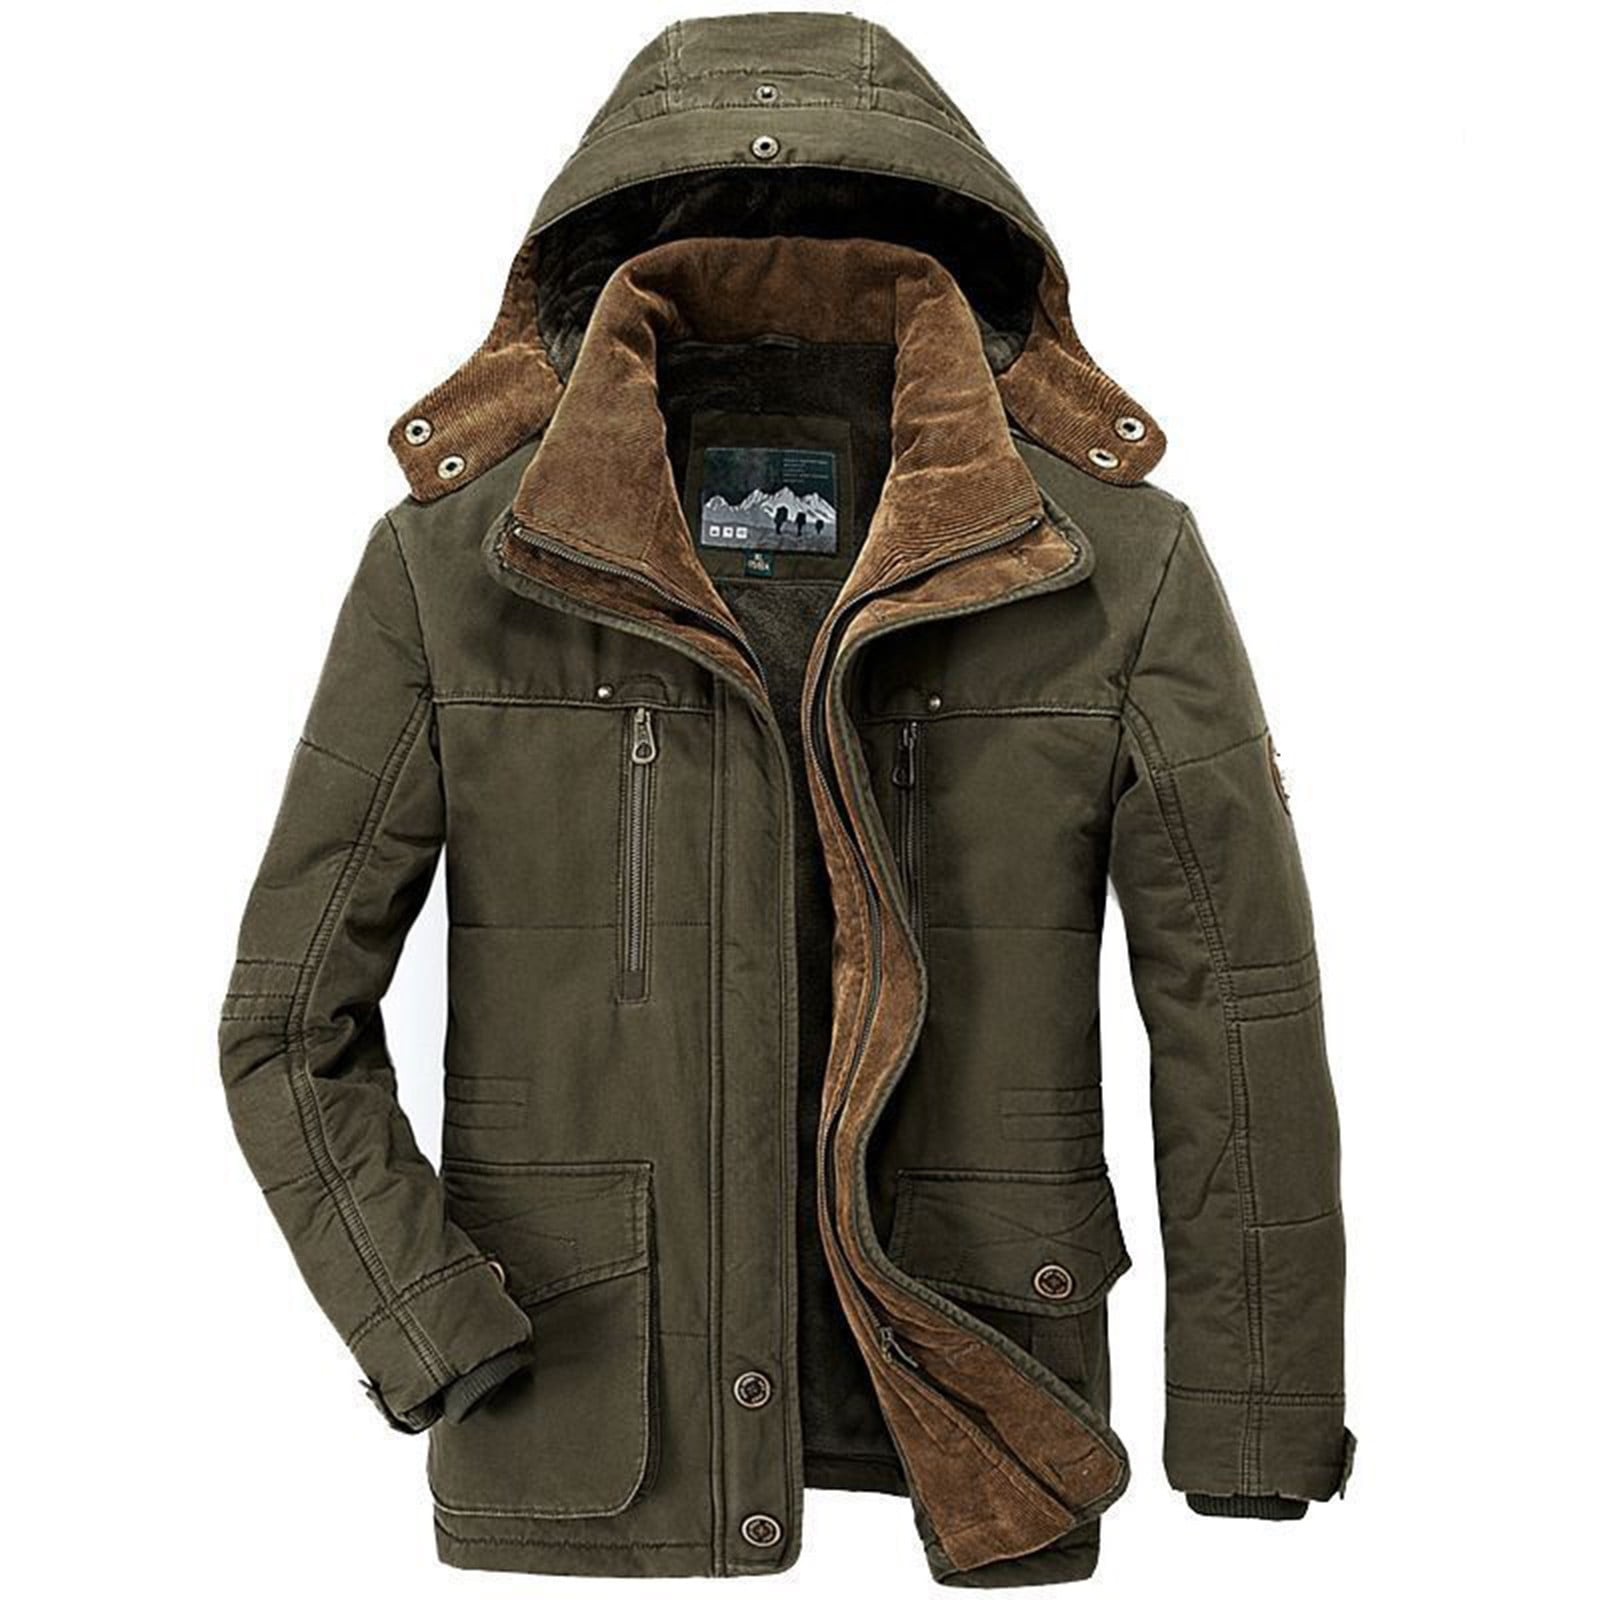 TQWQT Men's Winter Warm Parka Jacket Sherpa Lined Cotton Coat with ...